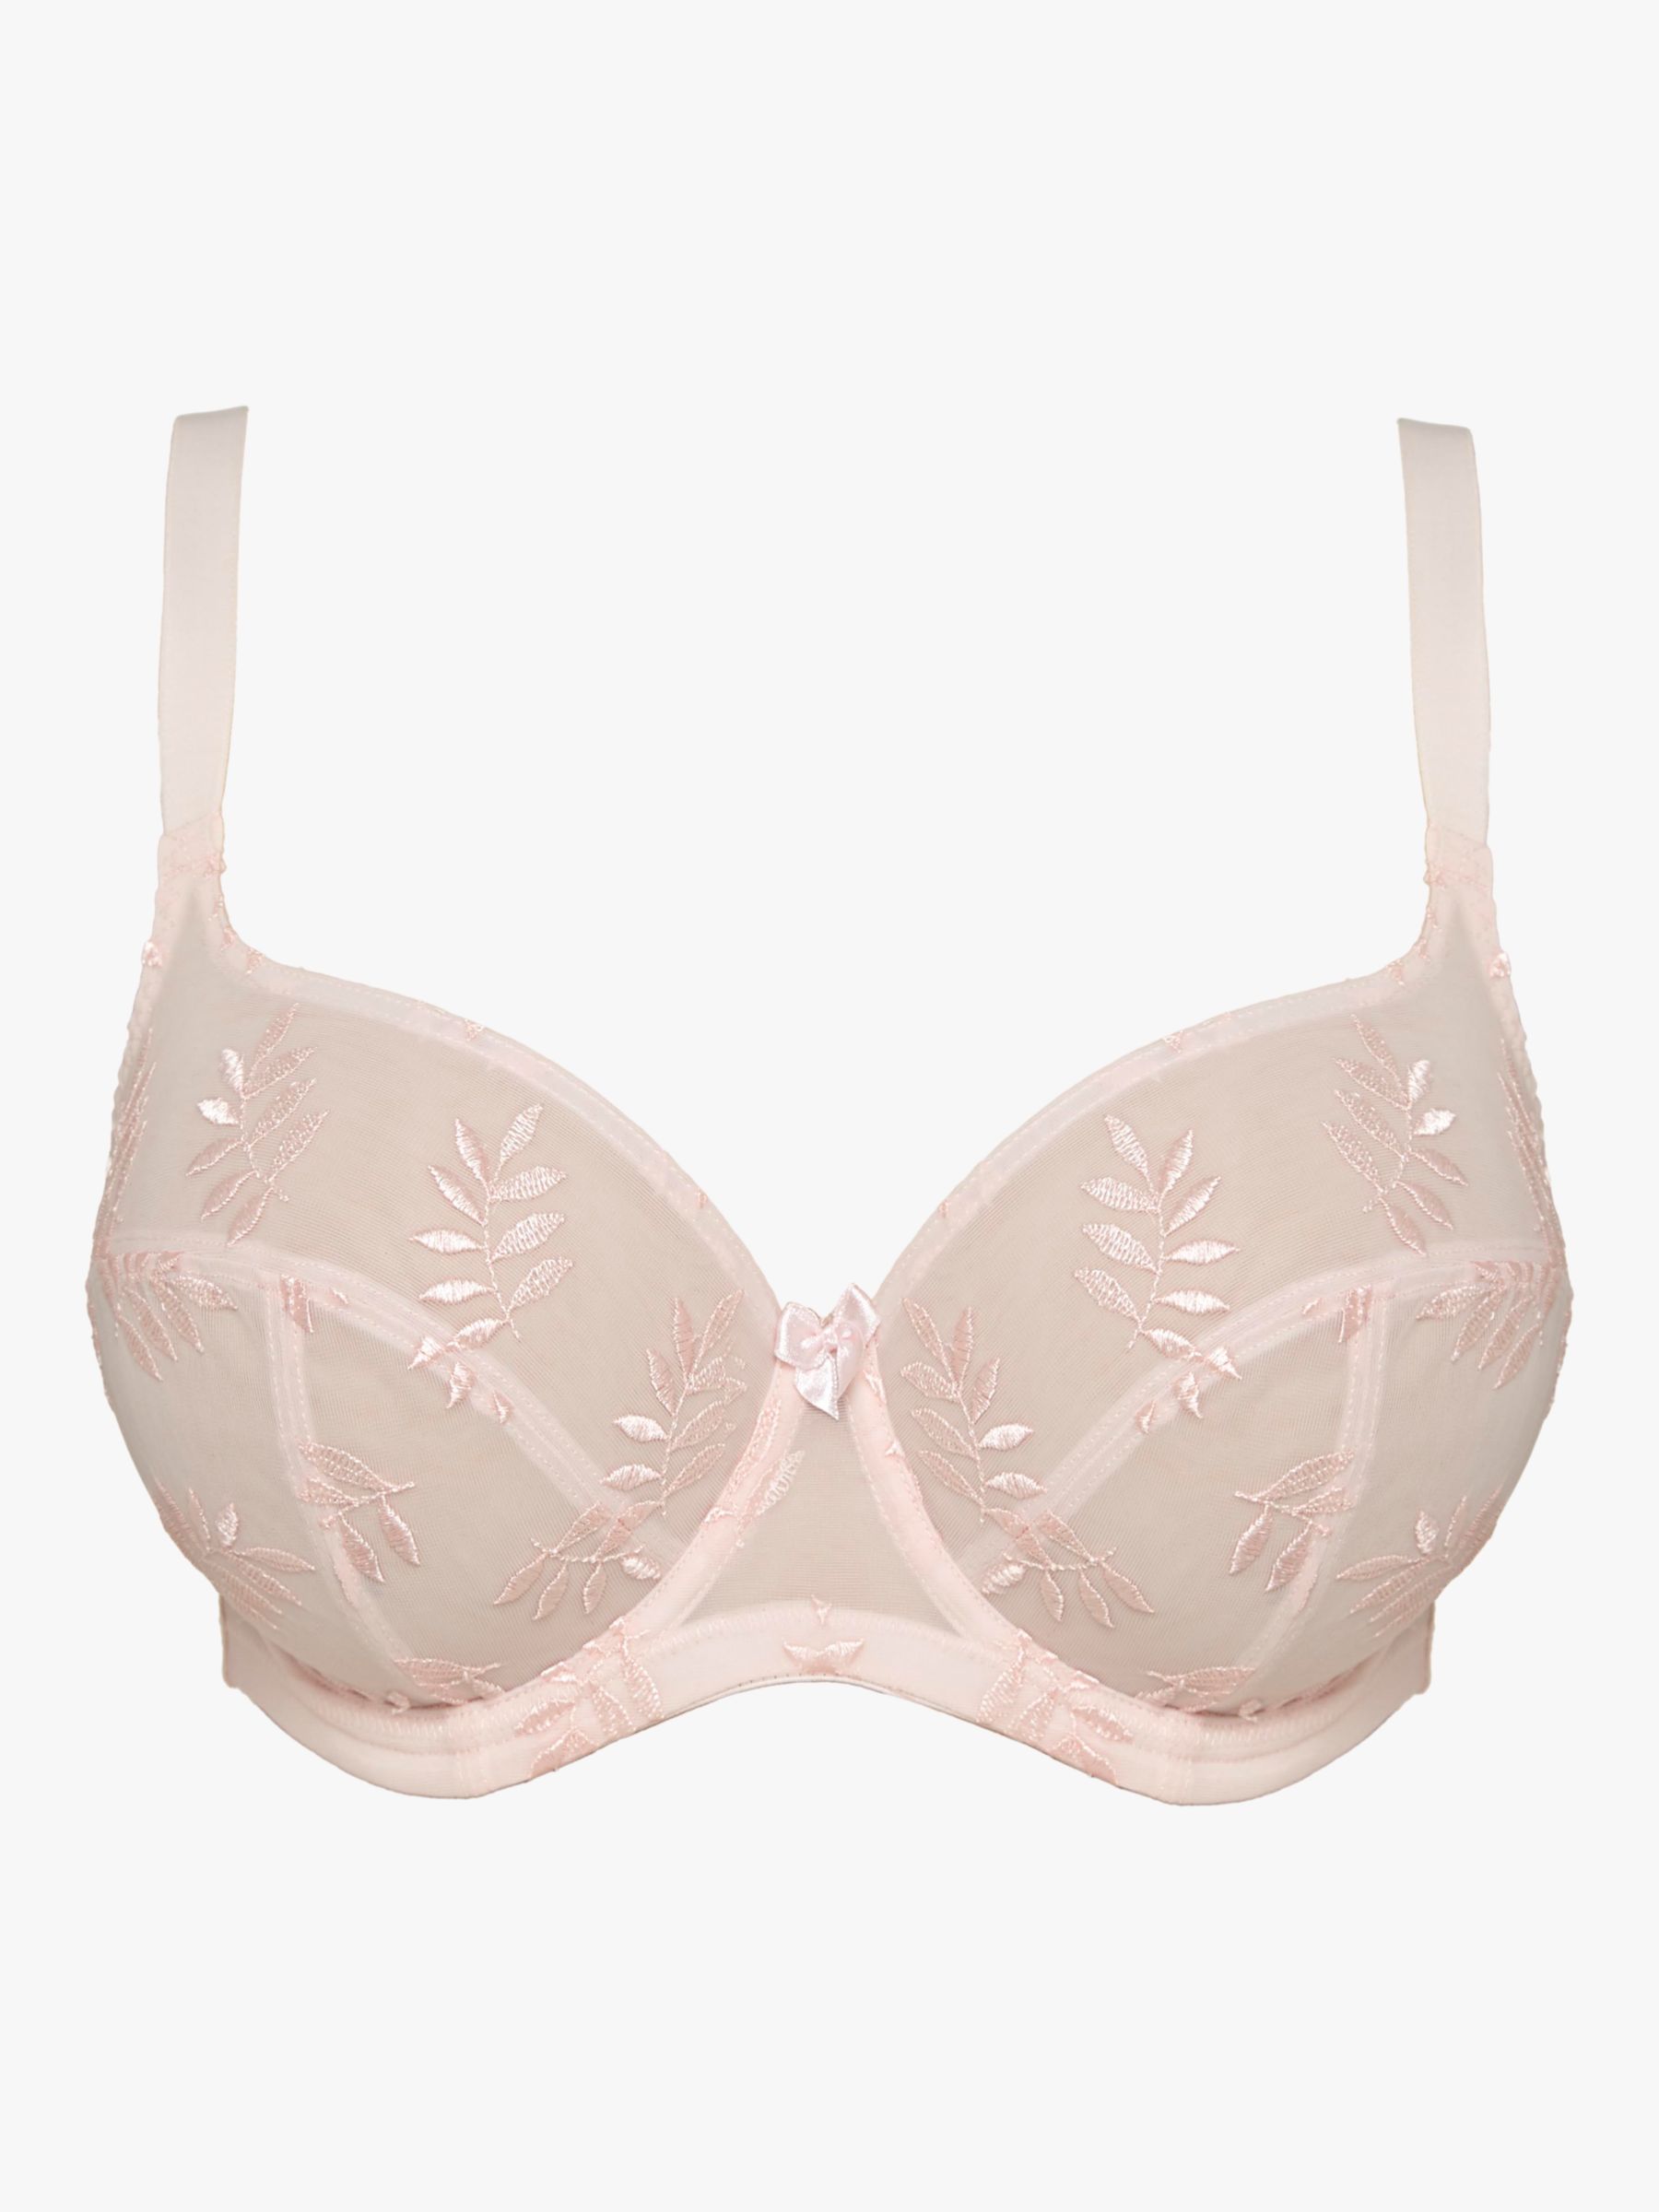 Collection By John Lewis Ava Embroidered Underwired Bra BNWOT Various Sizes